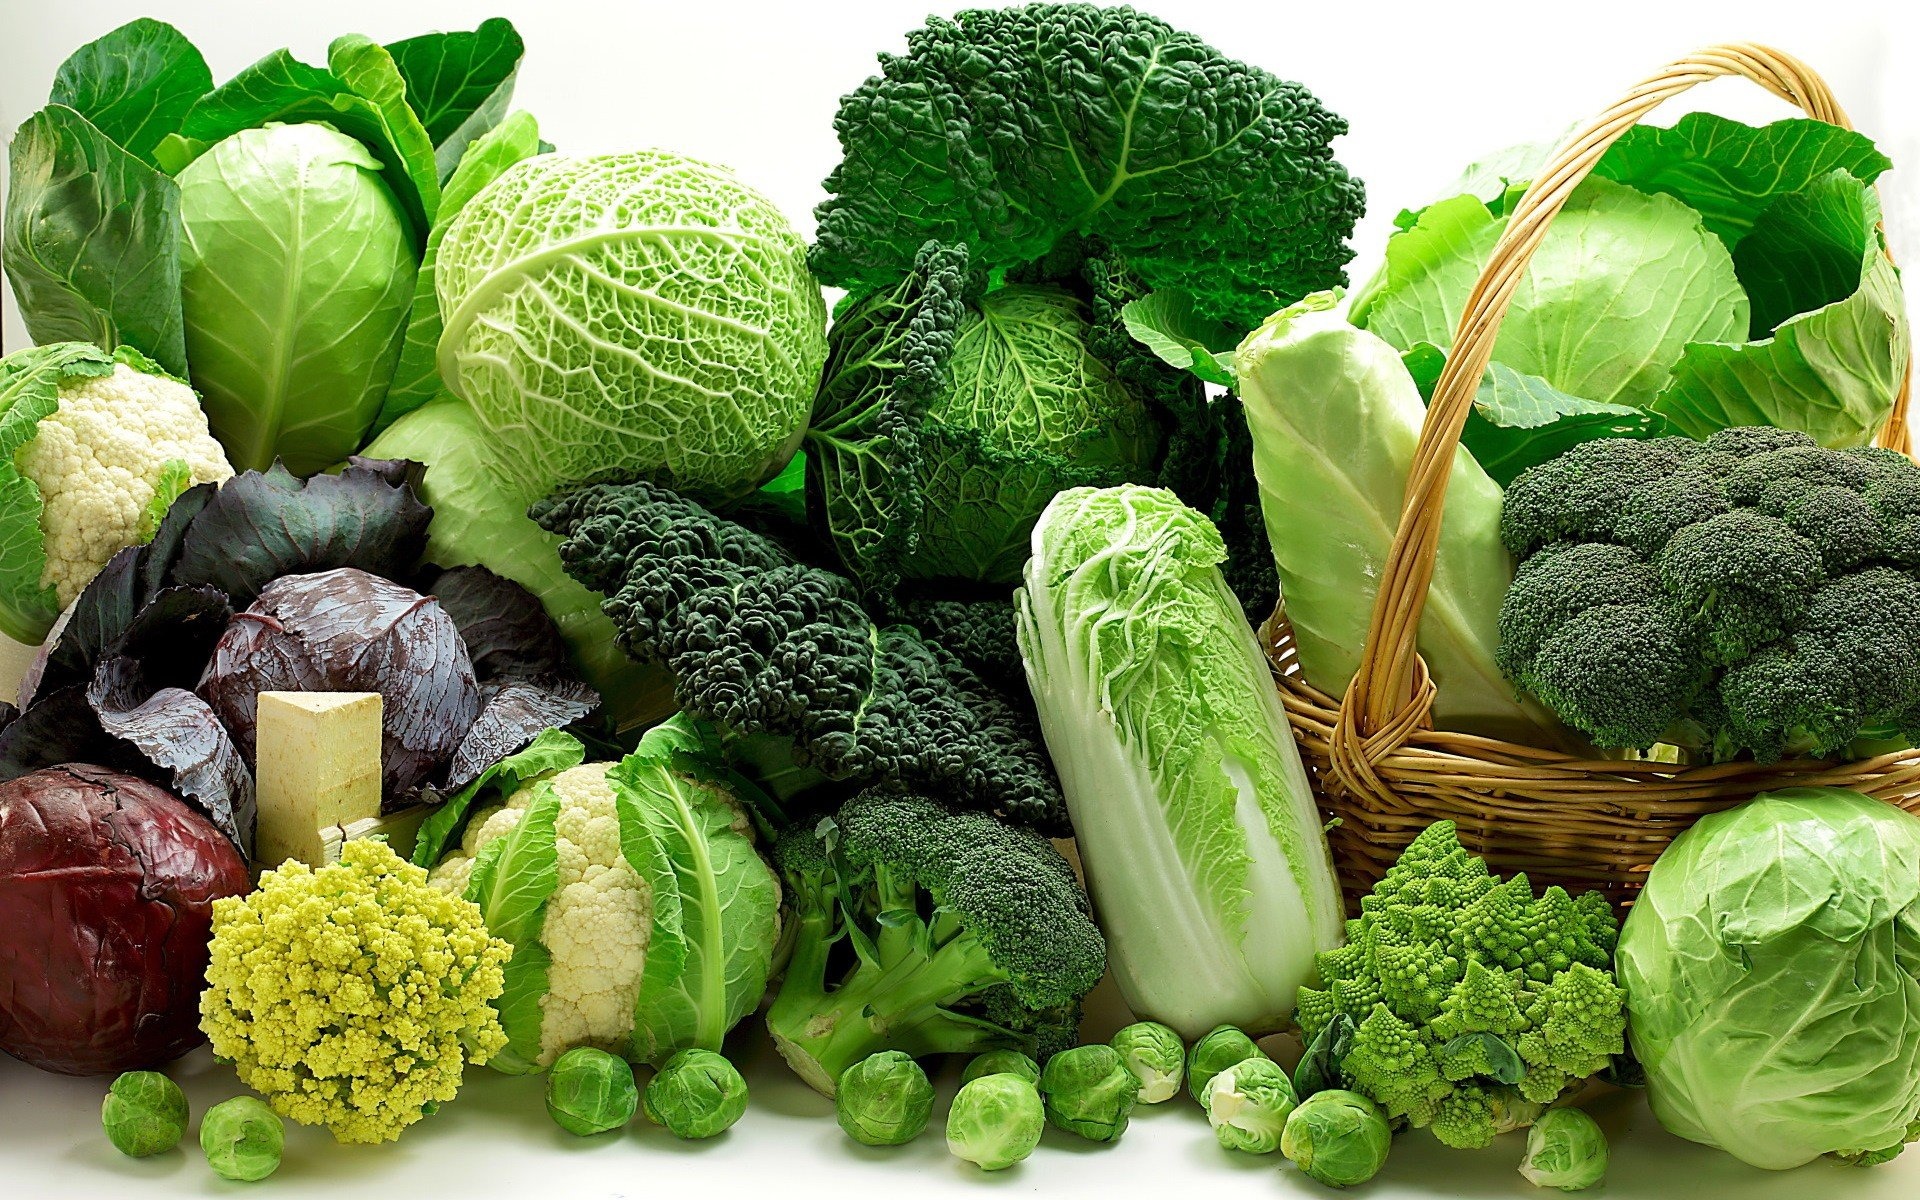 Vegetables: The cabbage family, Cauliflower, Bok choy, Broccoli, Brussels sprouts. 1920x1200 HD Wallpaper.